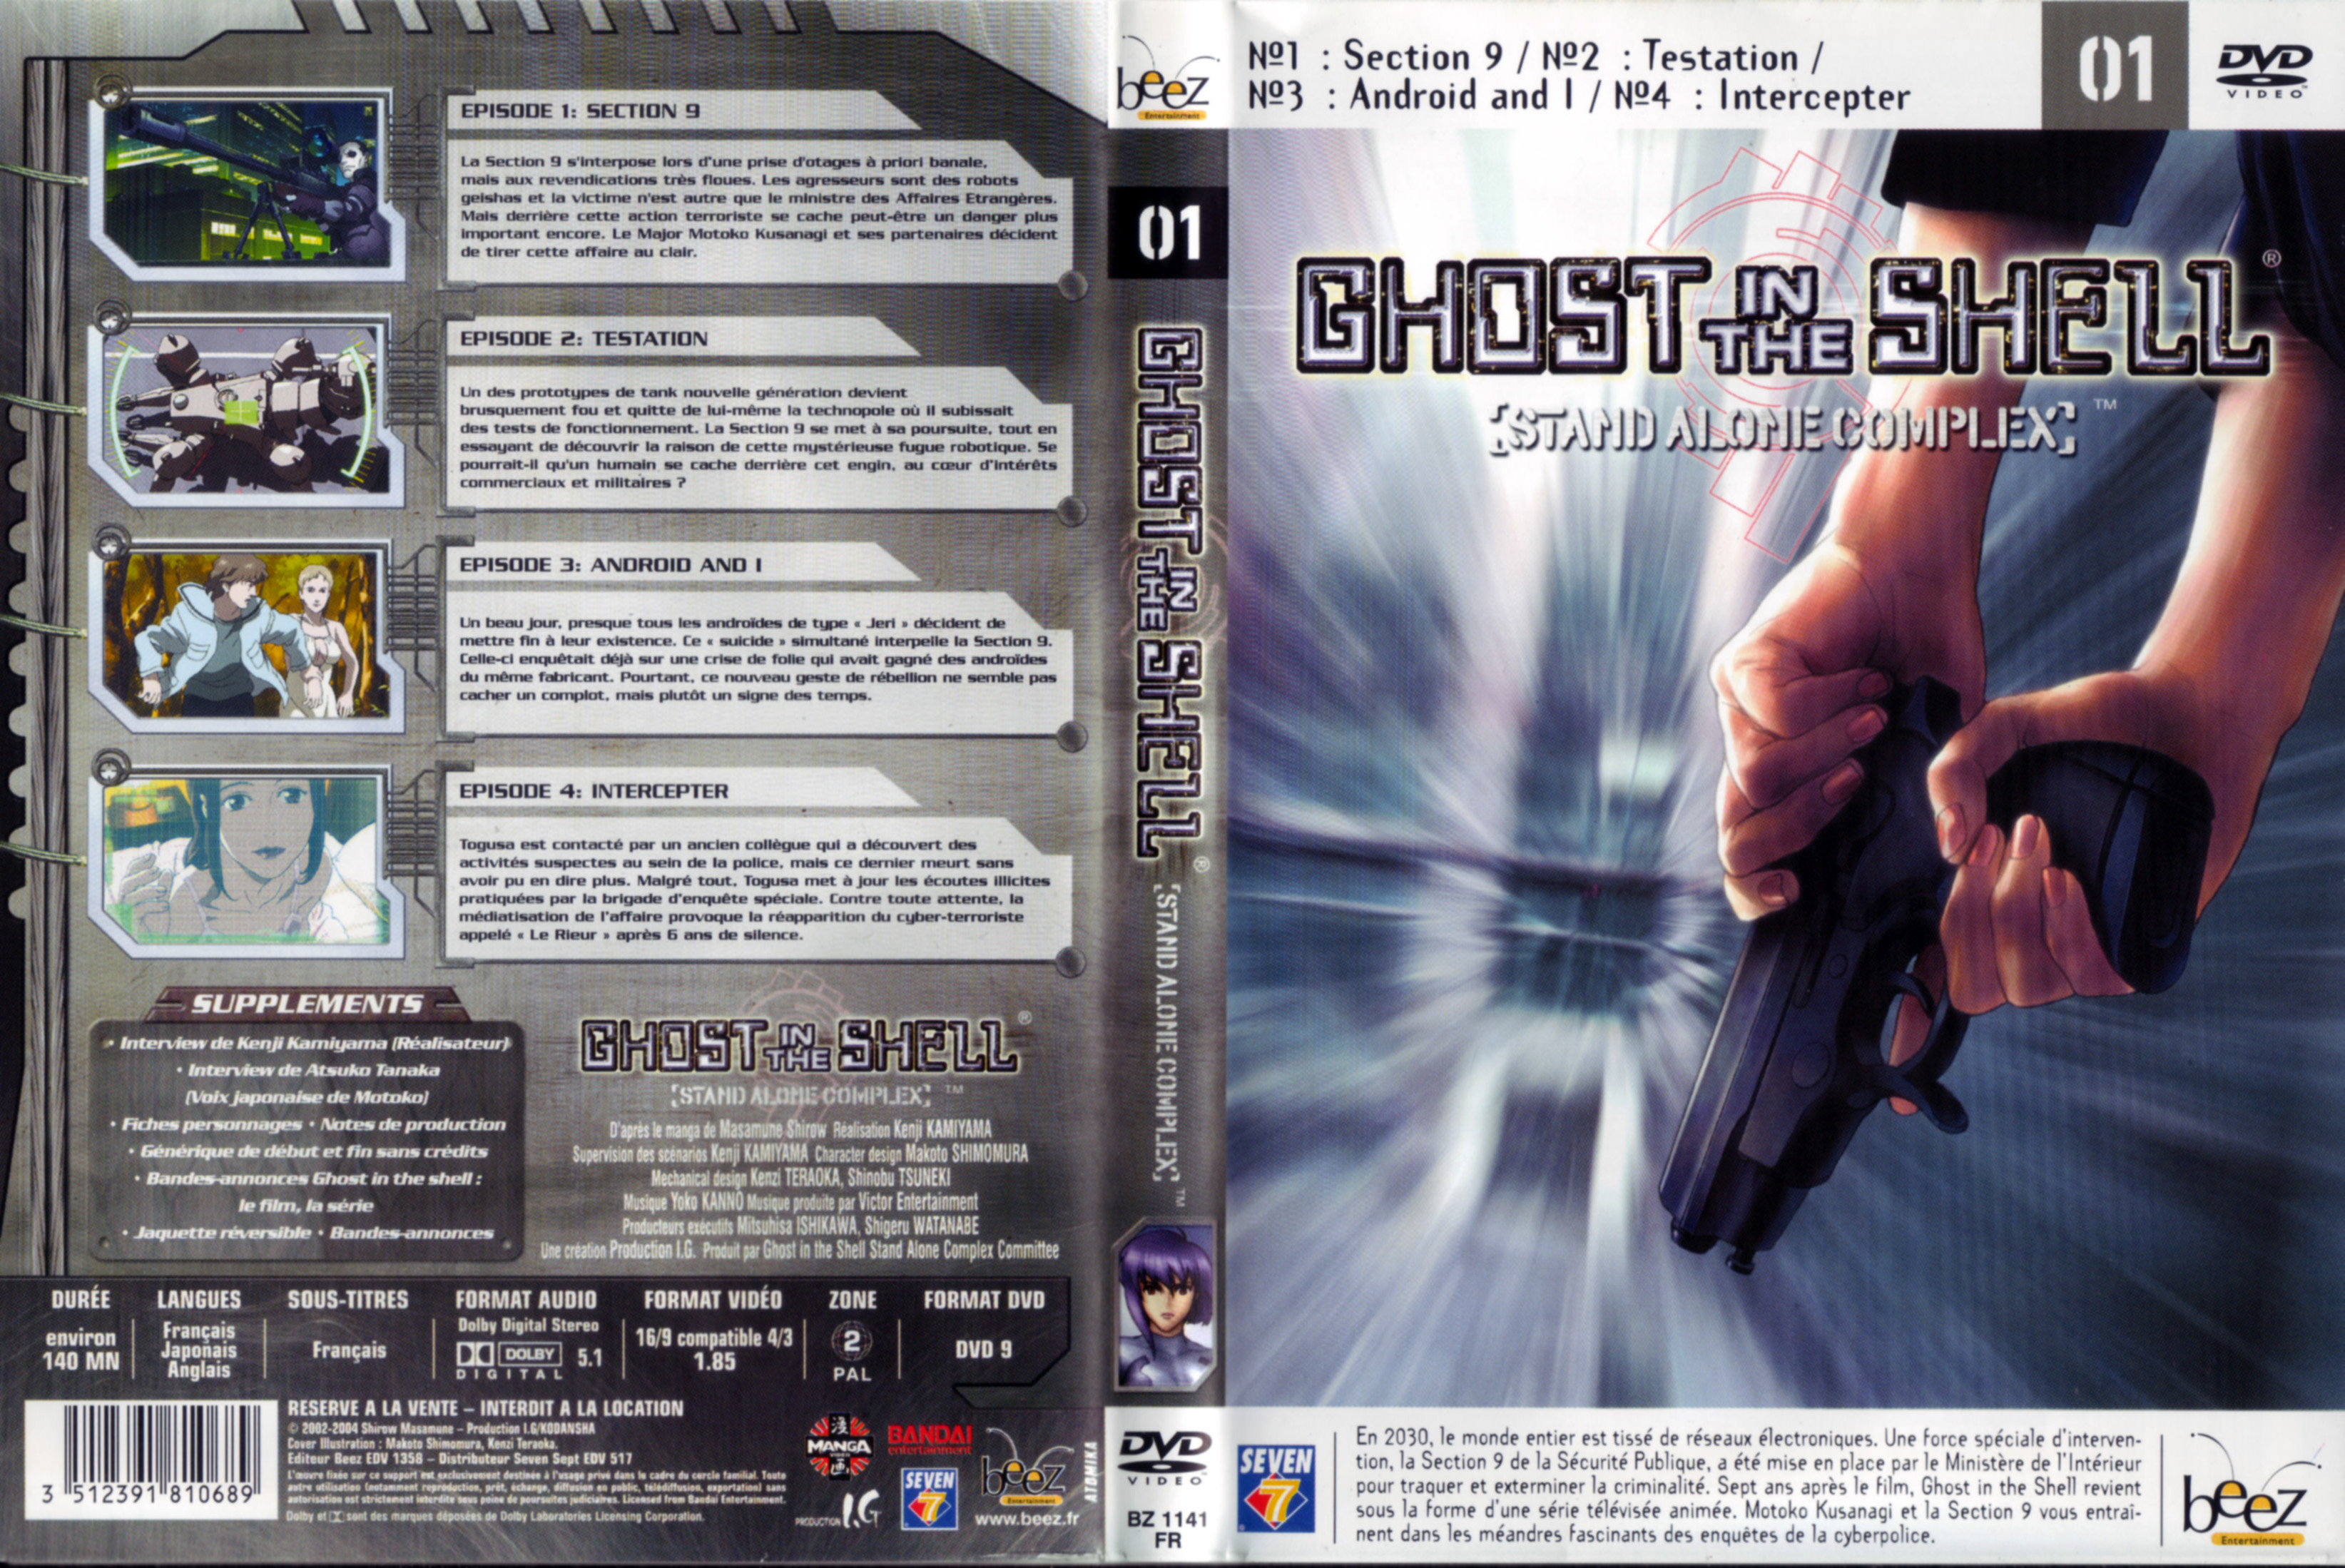 Jaquette DVD Ghost in the shell - stand alone complex vol 1 v2